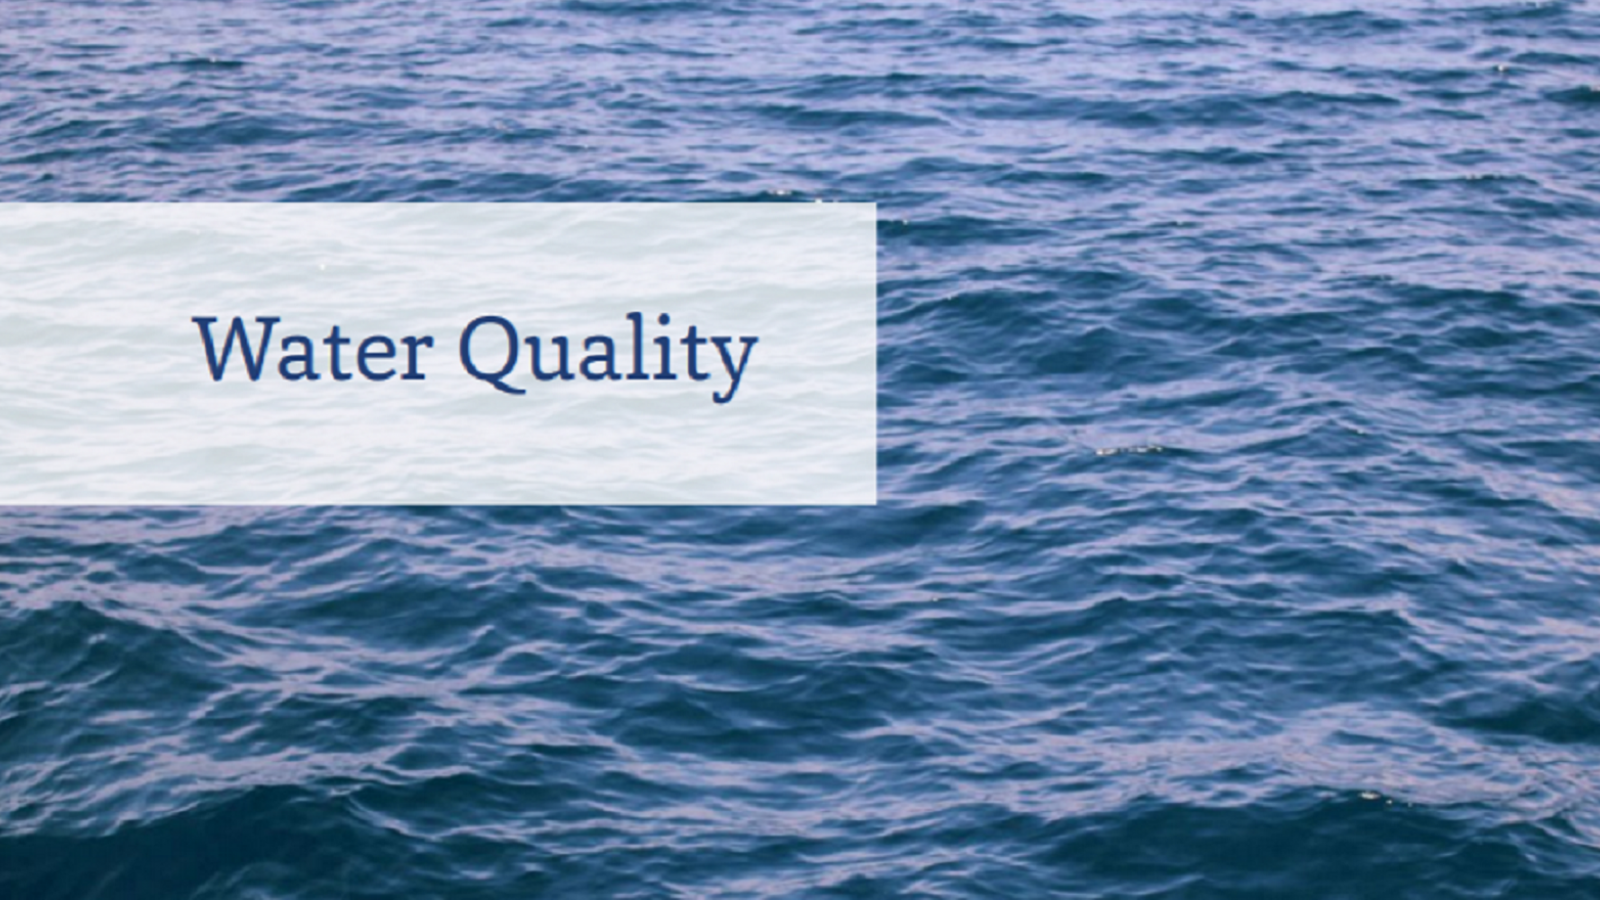 Body of water with ripples on the surface with text that reads 'Water Quality'